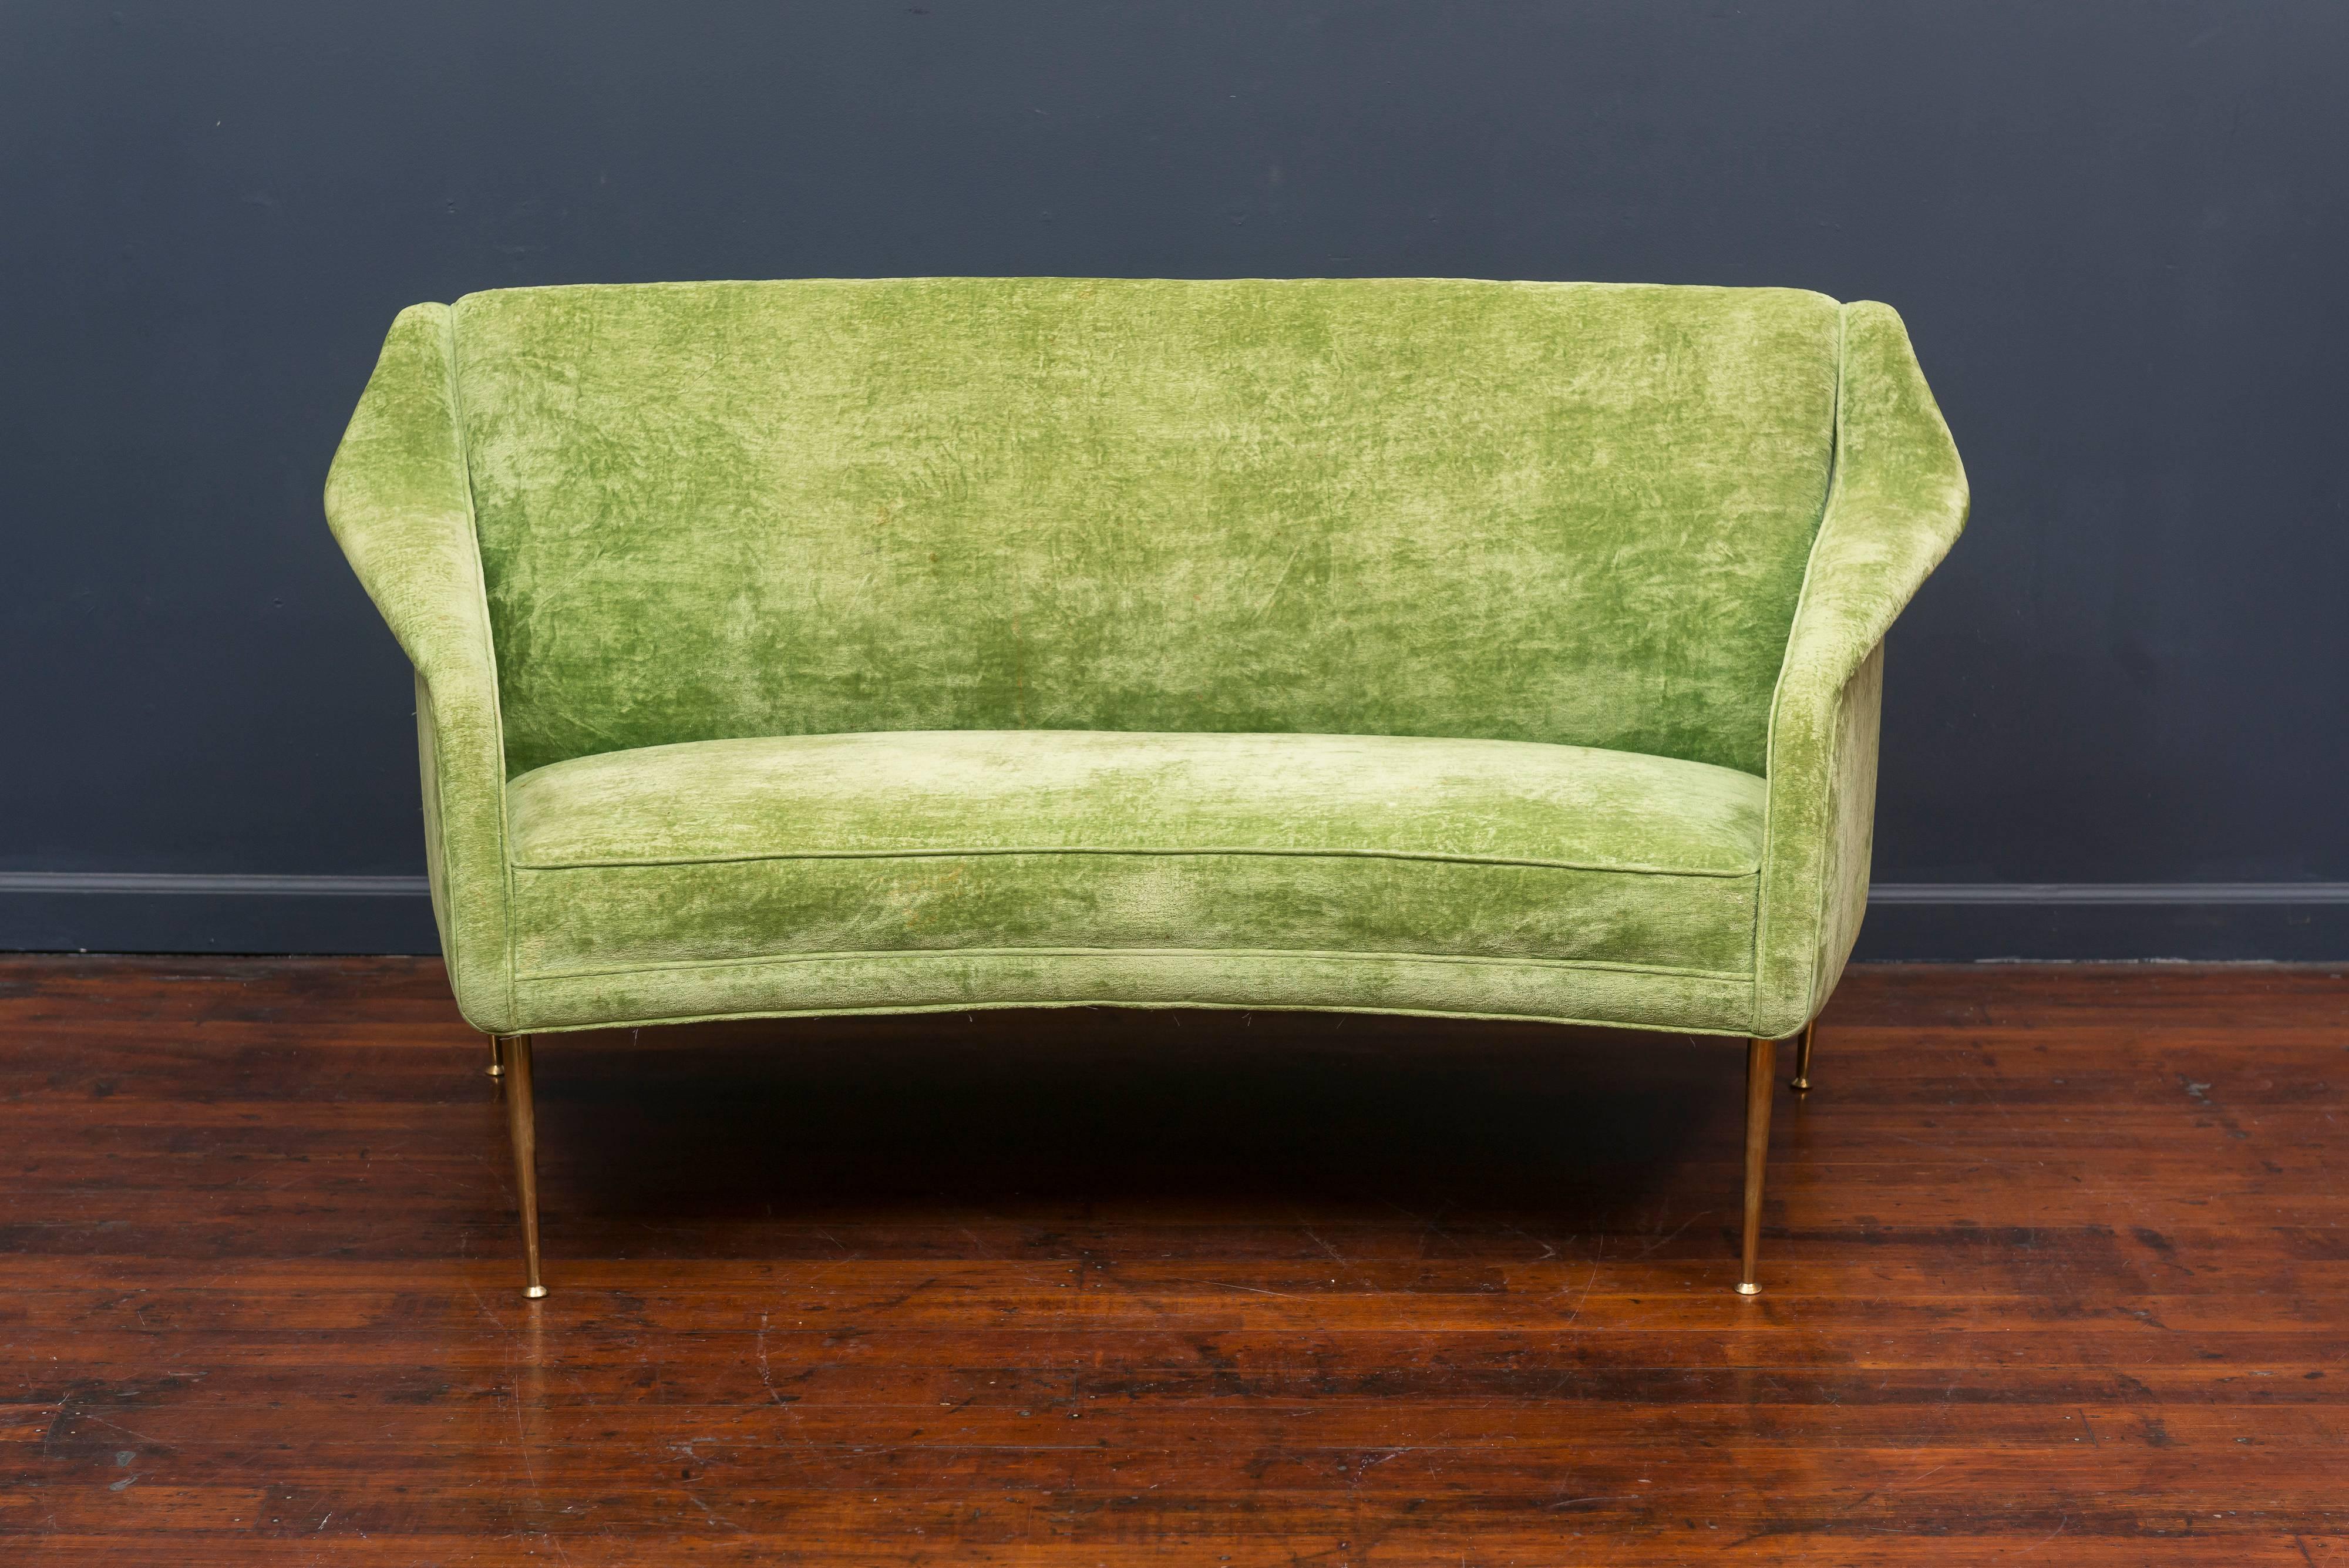 Rare settee model #159 designed settee by Carlo de Carli for Singer & Son's, Italy. Classic Italian midcentury design that is comfortable and sophisticated. Original velvet upholstery on polished brass legs.